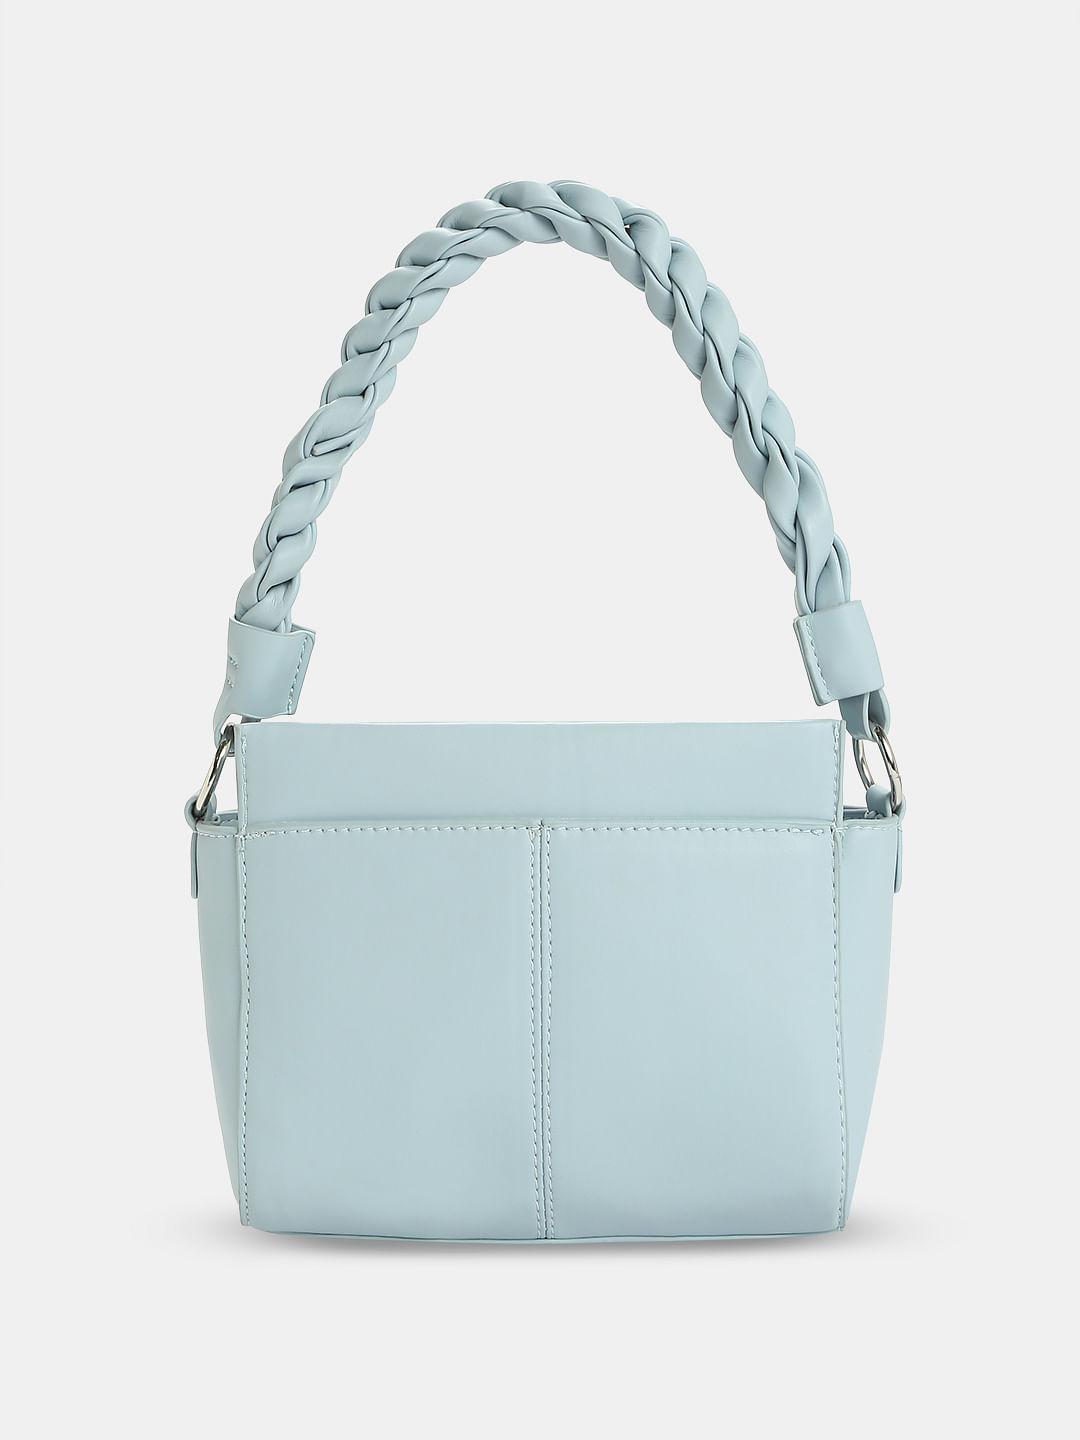 20 Stylish Summer Bags And Fashion Accessories That Every Woman Needs »  Read Now!